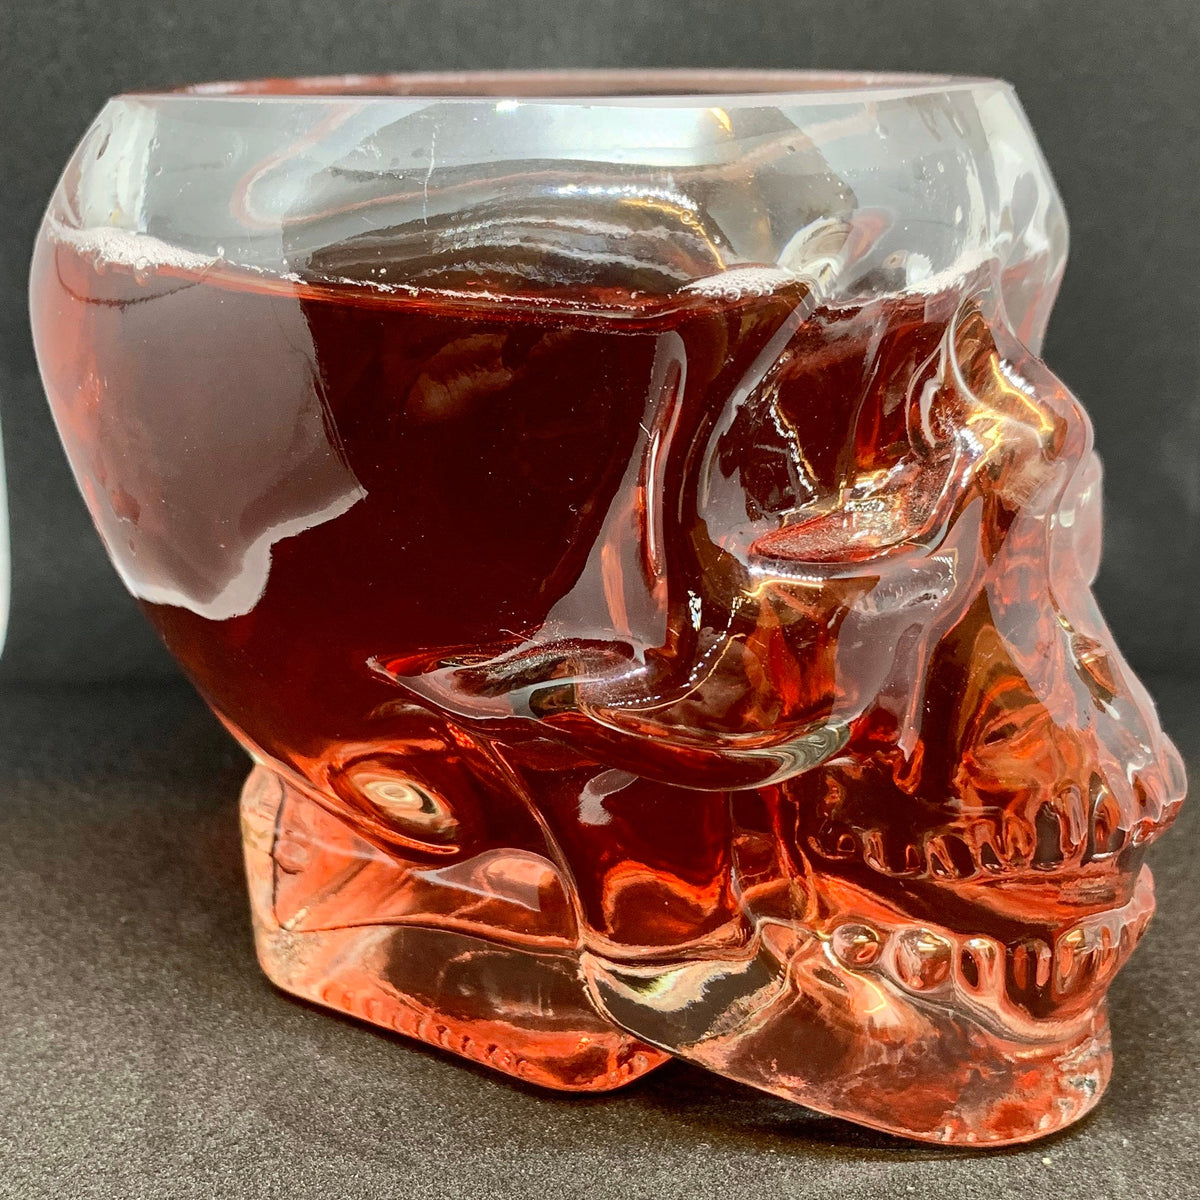 Skull Glass / candle holder 350ml / 12oz |Cocktail | Beer | Rum | Punch | Party | Desert | Decorative